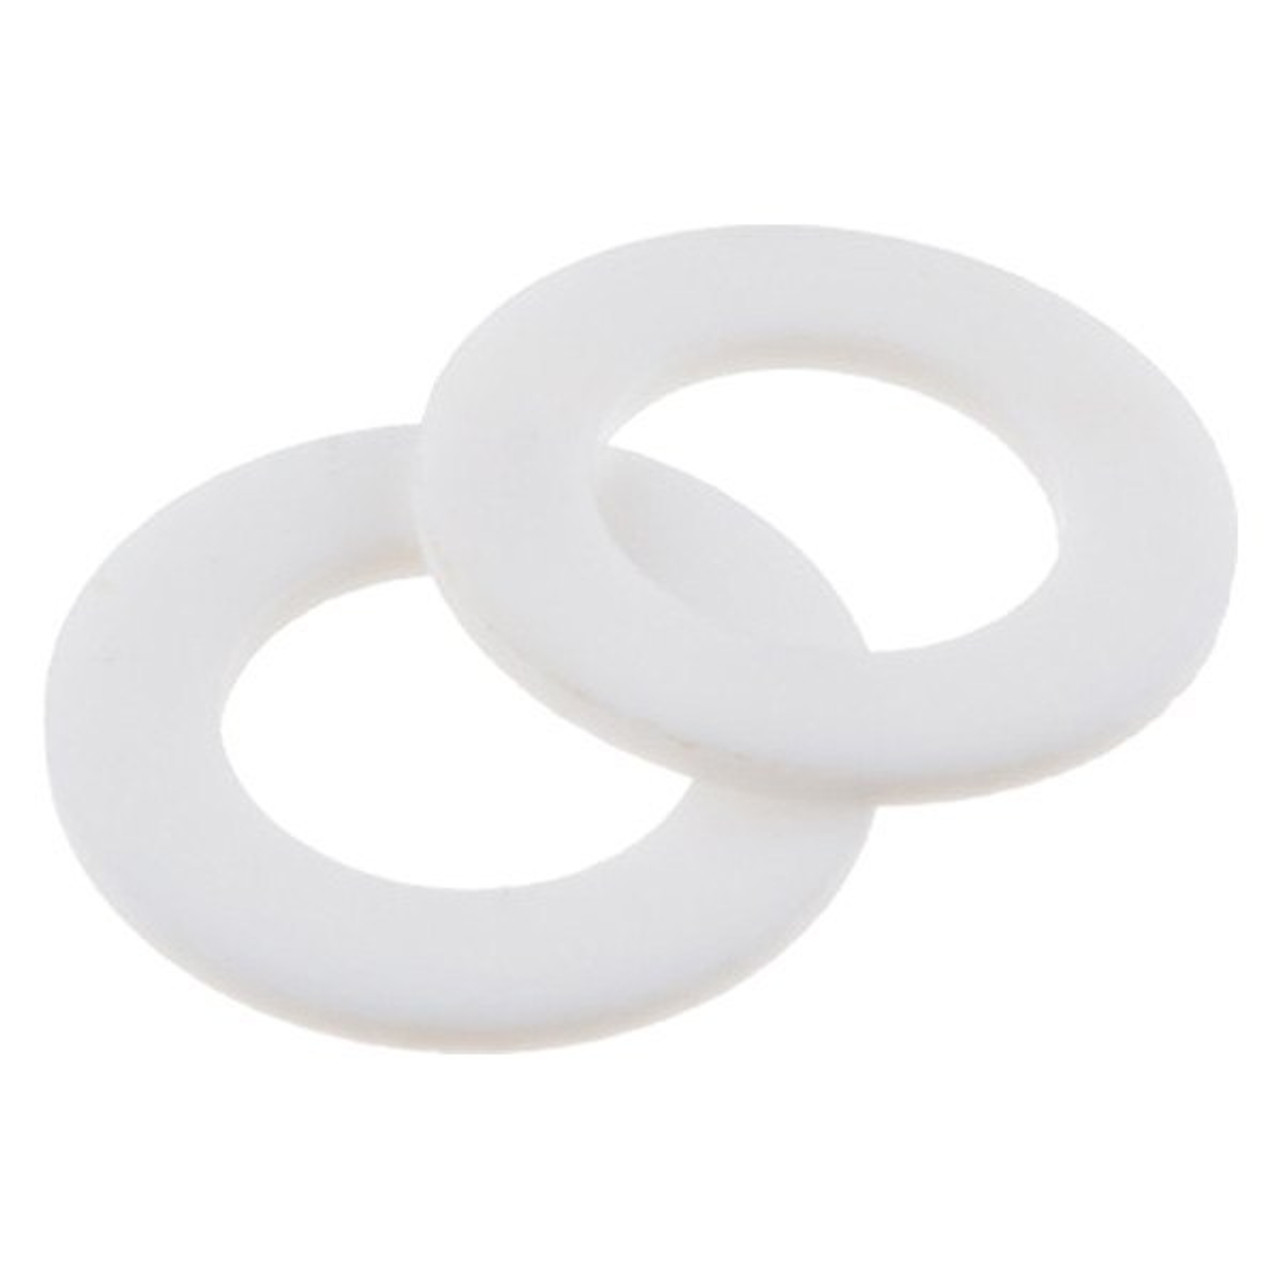 RHP8832-08-03, 08 WHITE GASKETS FOR 8832 SERIES -2PCS/PKG